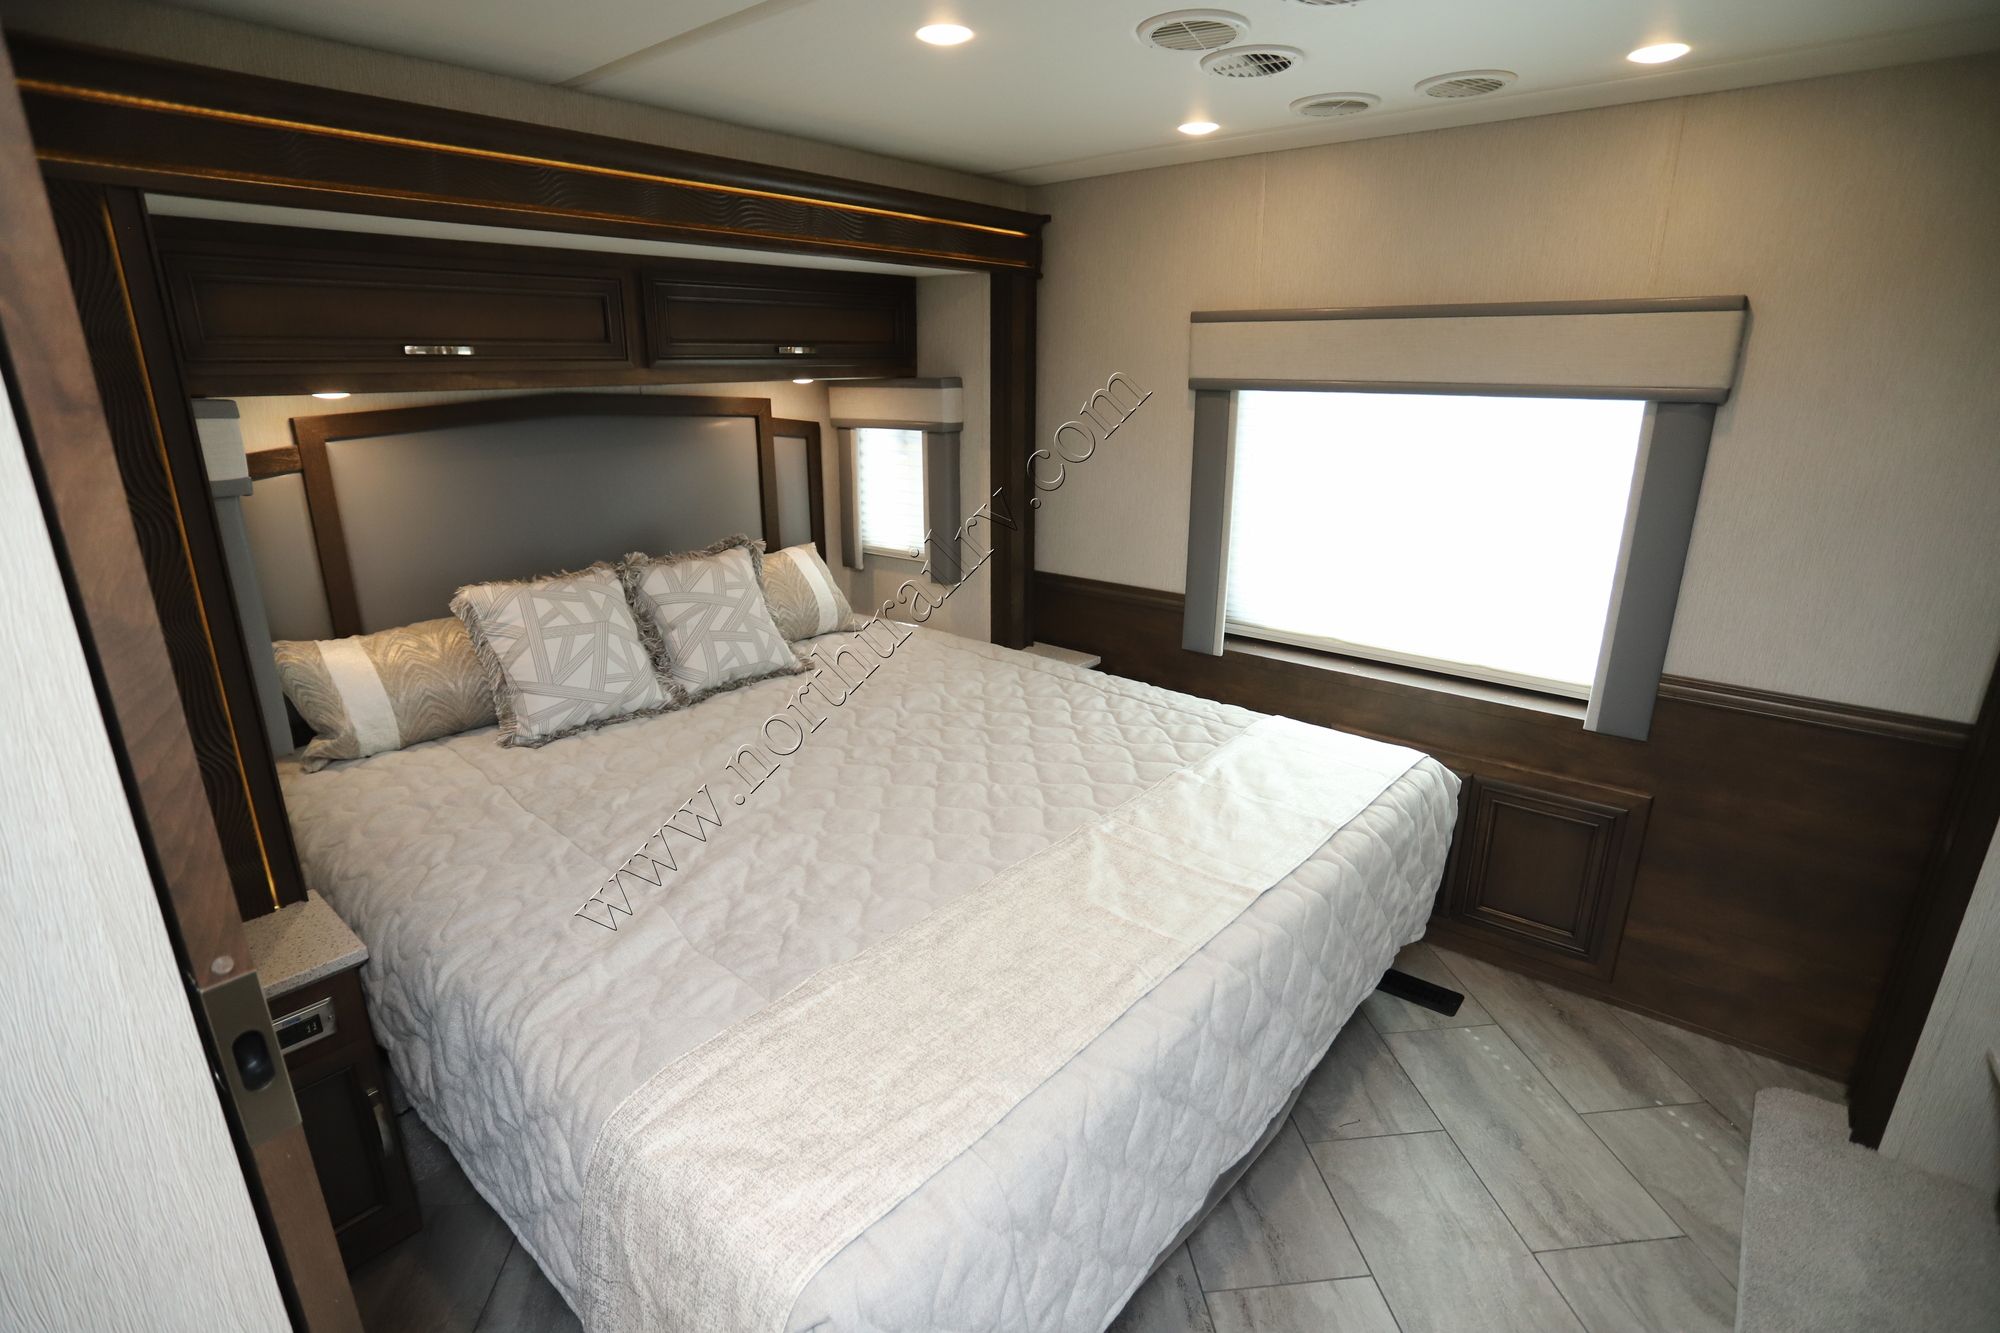 New 2023 Newmar Bay Star Sport 2920 Class A  For Sale